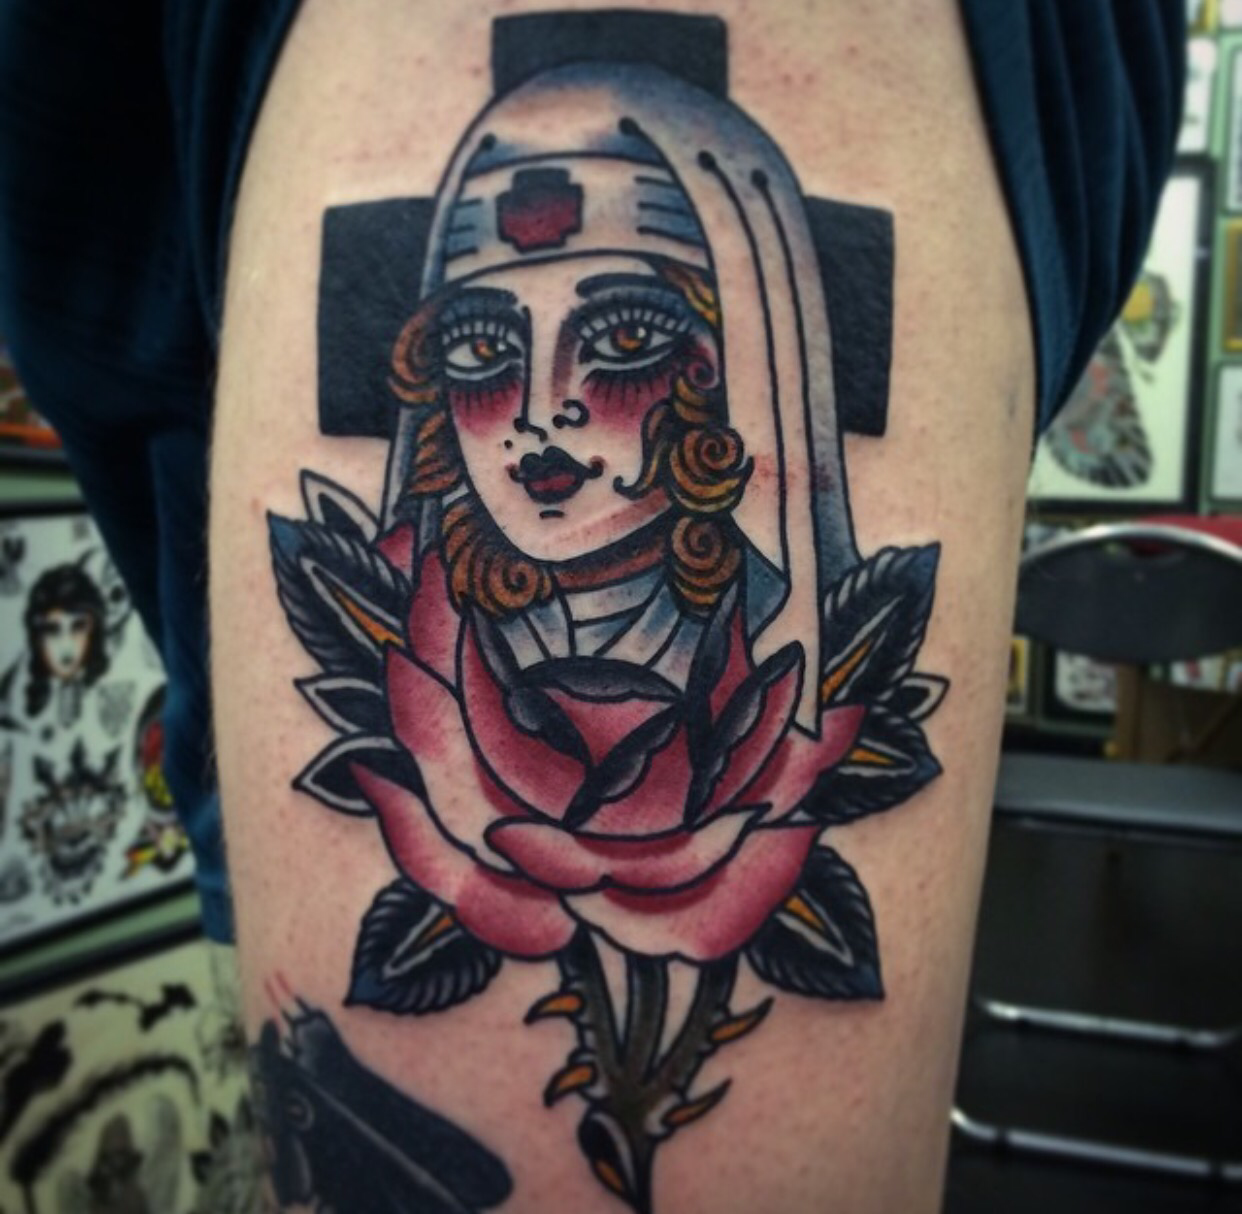 A nurse tattoo I (Daniel Hughes) did at Sacred Tattoo Studio in Marquette  MI. IG is @danielhughestattoos if you want to check out some more work. : r/ tattoo